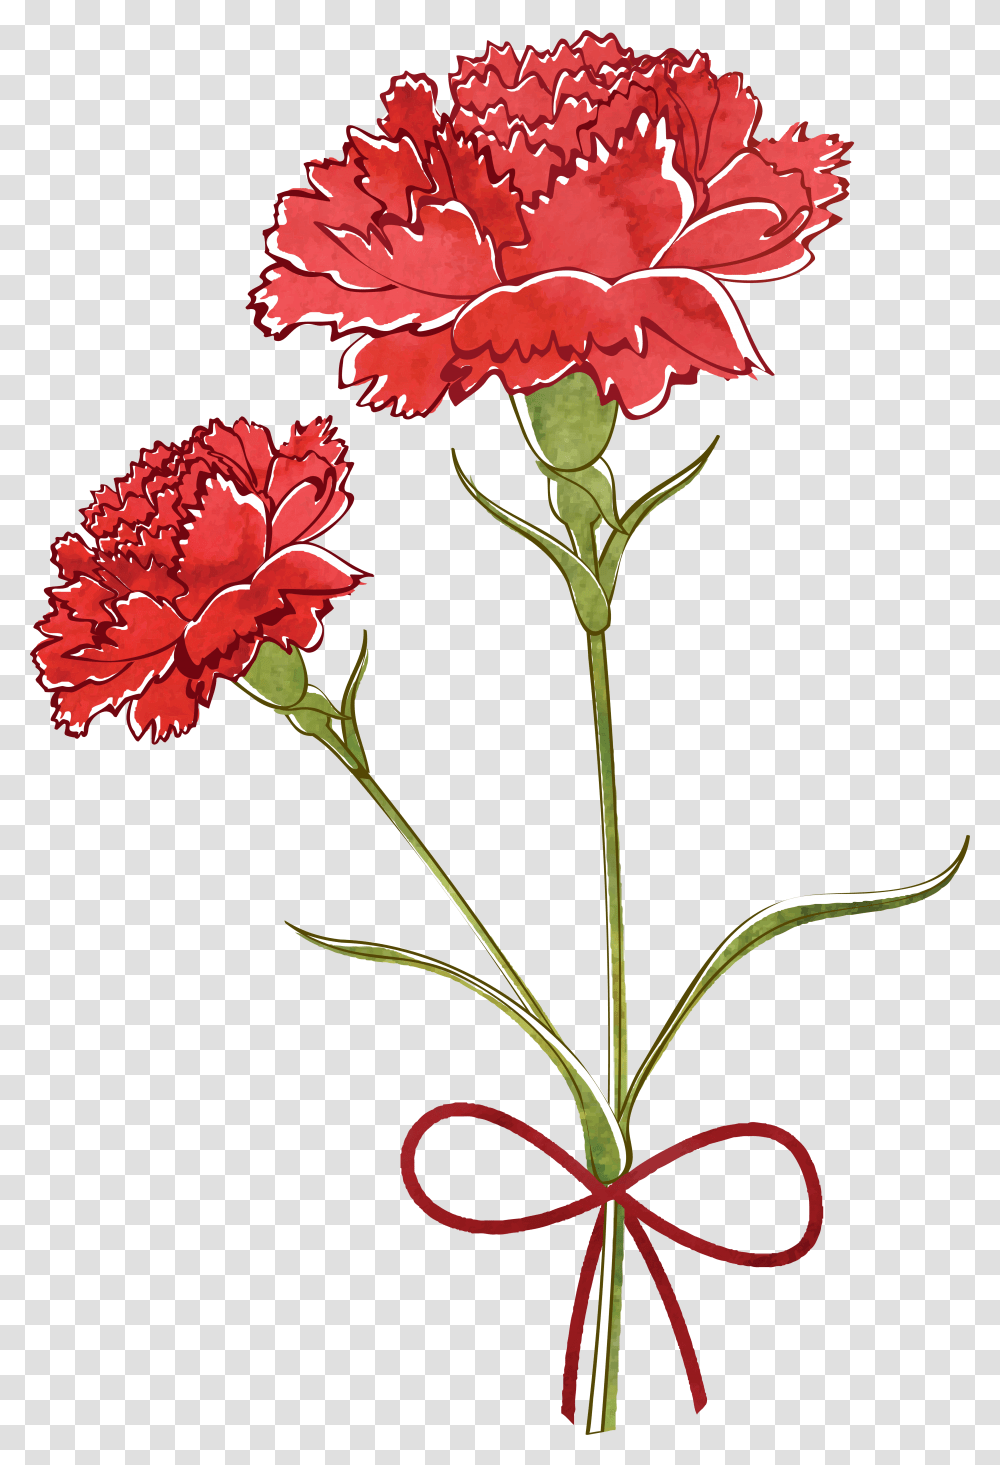 Flower Watercolor Painting Transprent Free Download Carnation Vector Free, Plant, Blossom Transparent Png